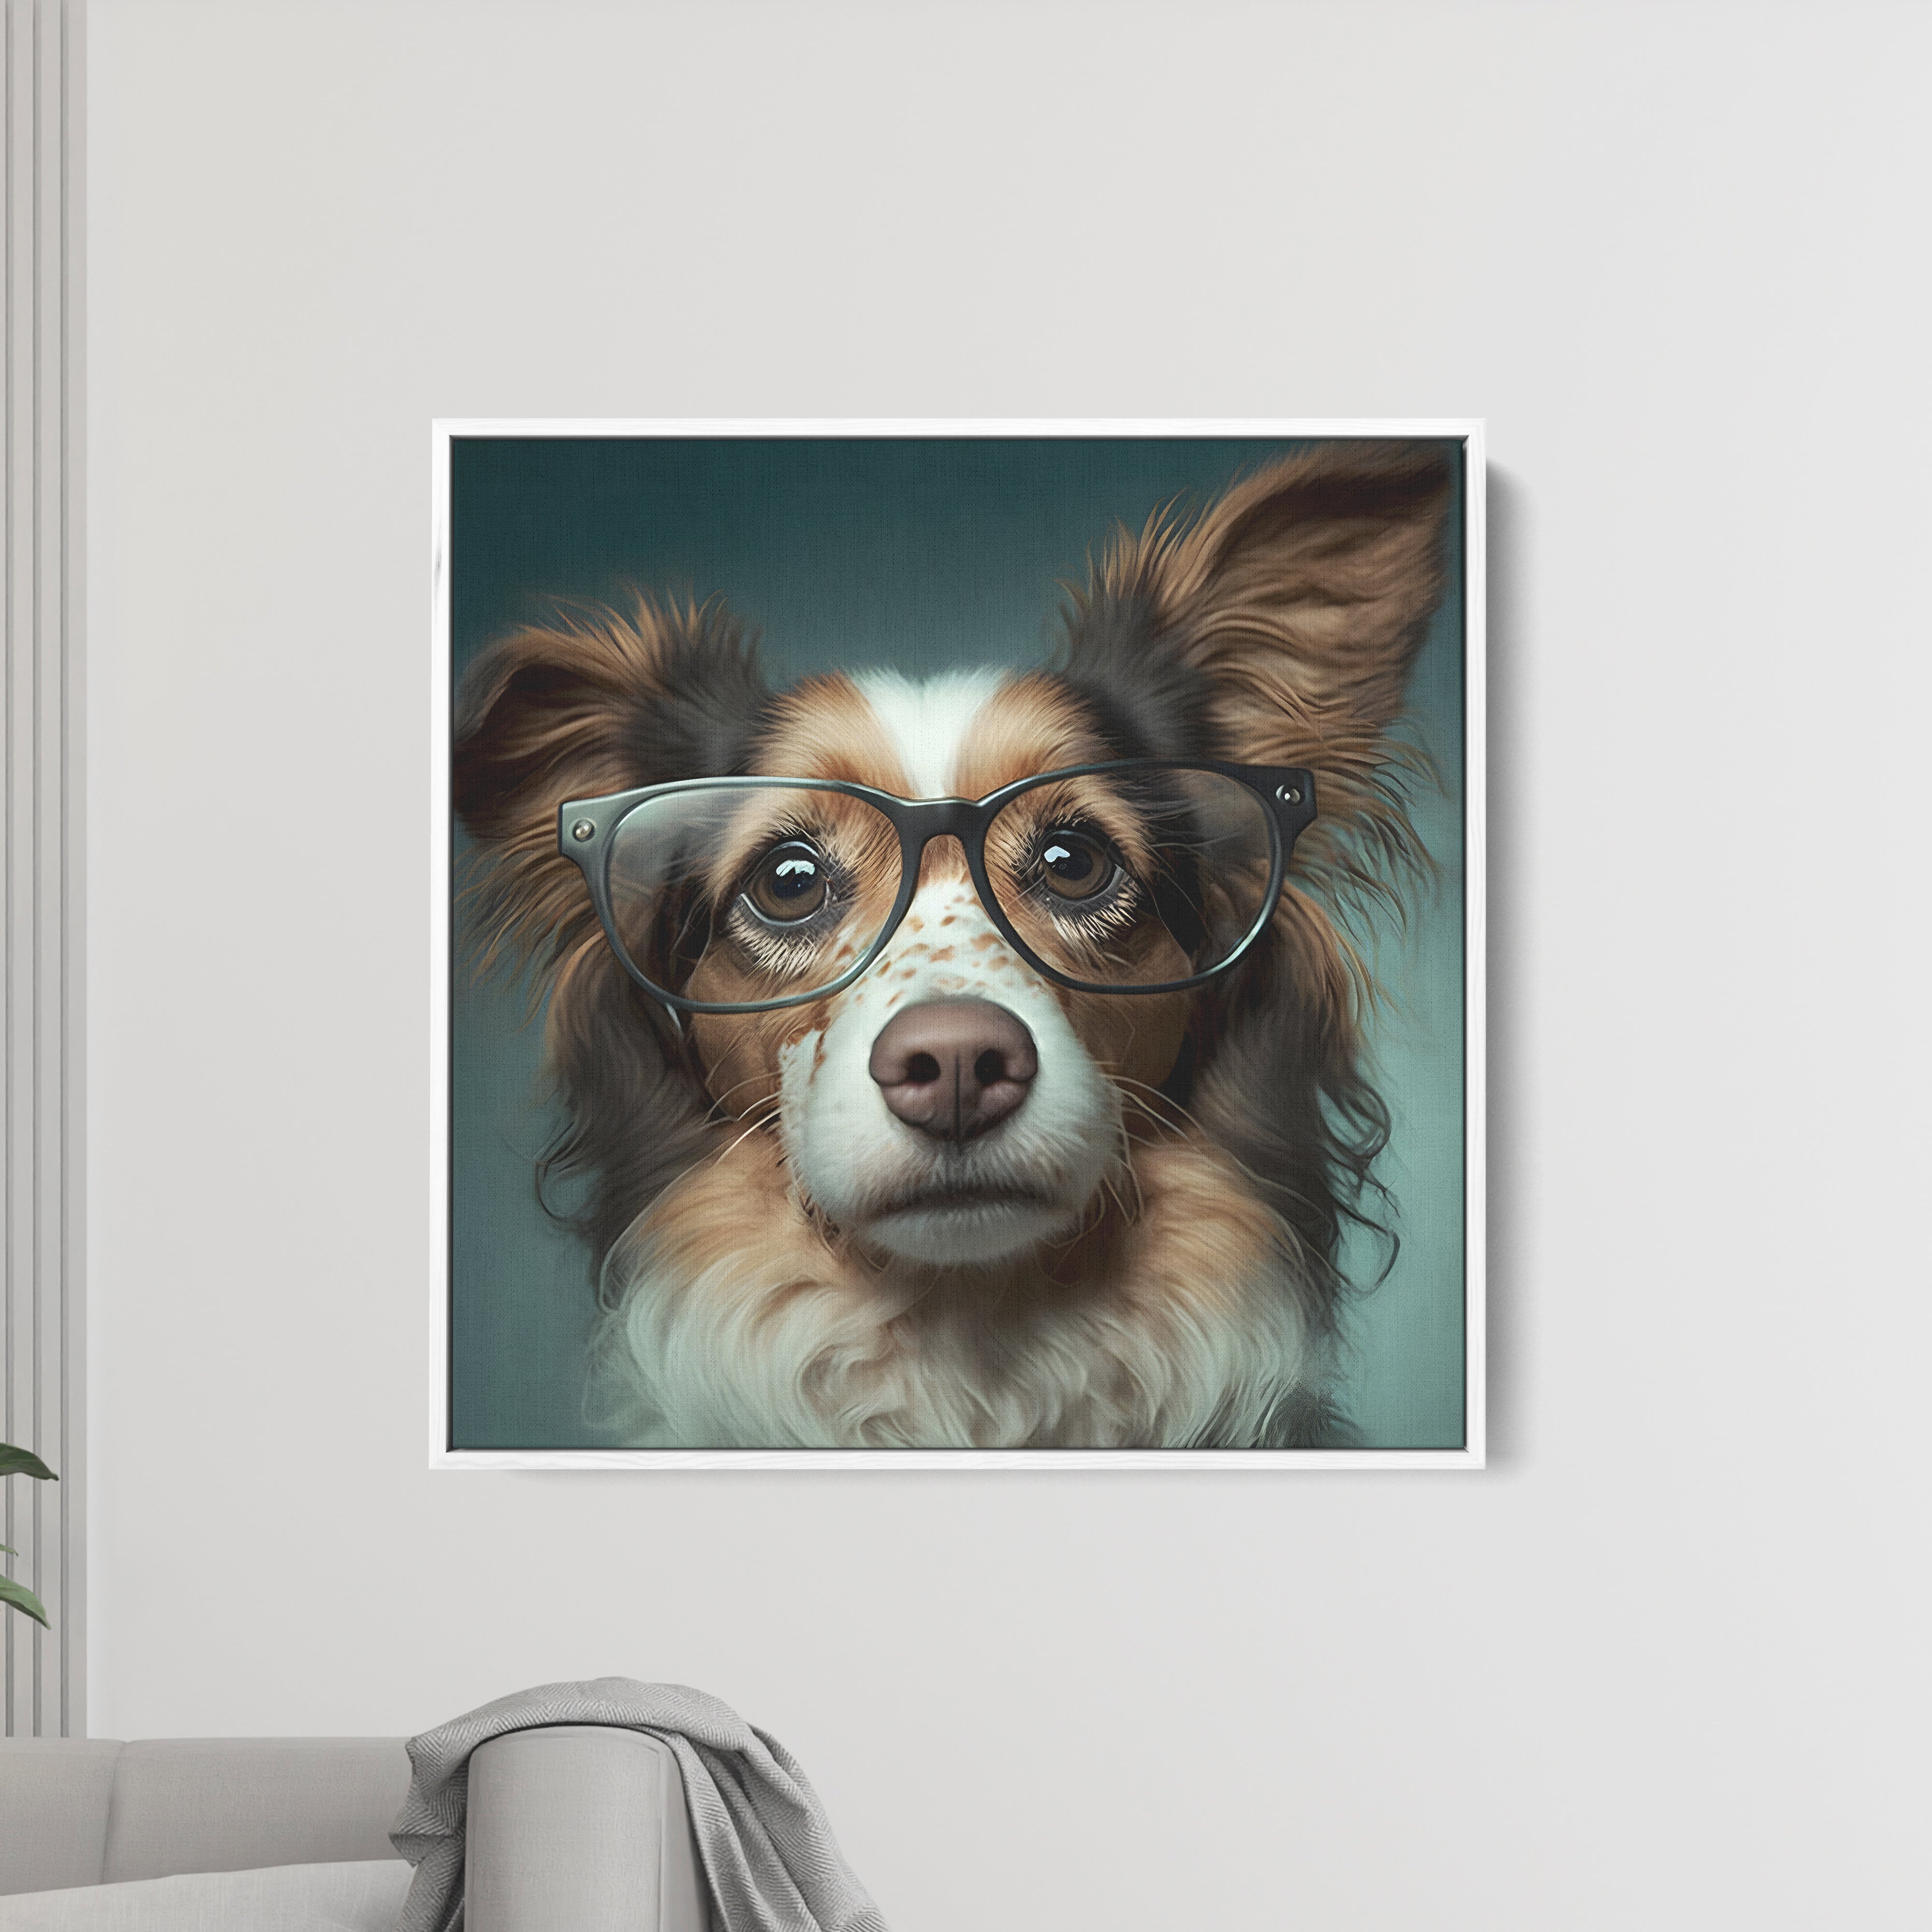 A Dog Wearing Glasses Canvas Wall Painting